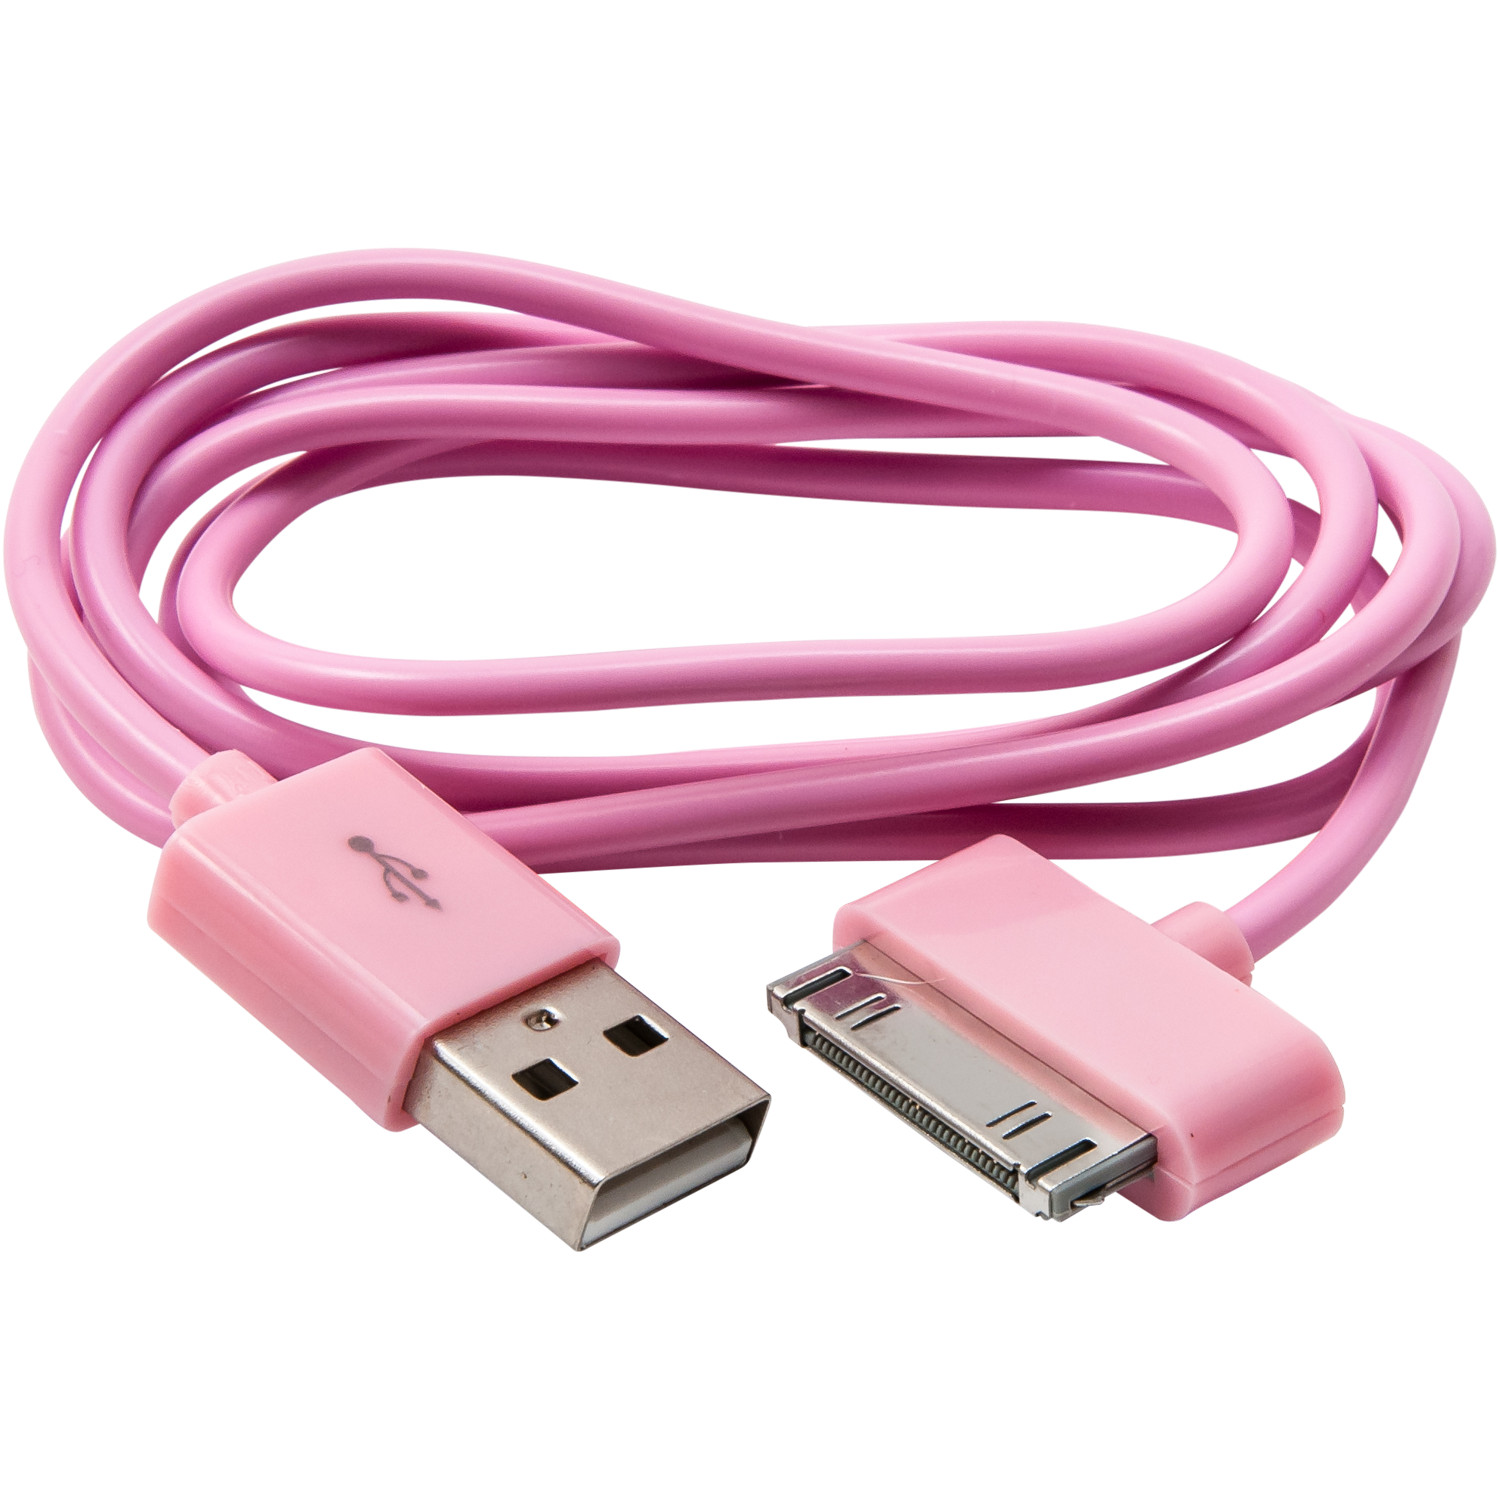 Data/Charging Cable for iPhone 4 (Pink) - $2.65 - JacobsParts Inc